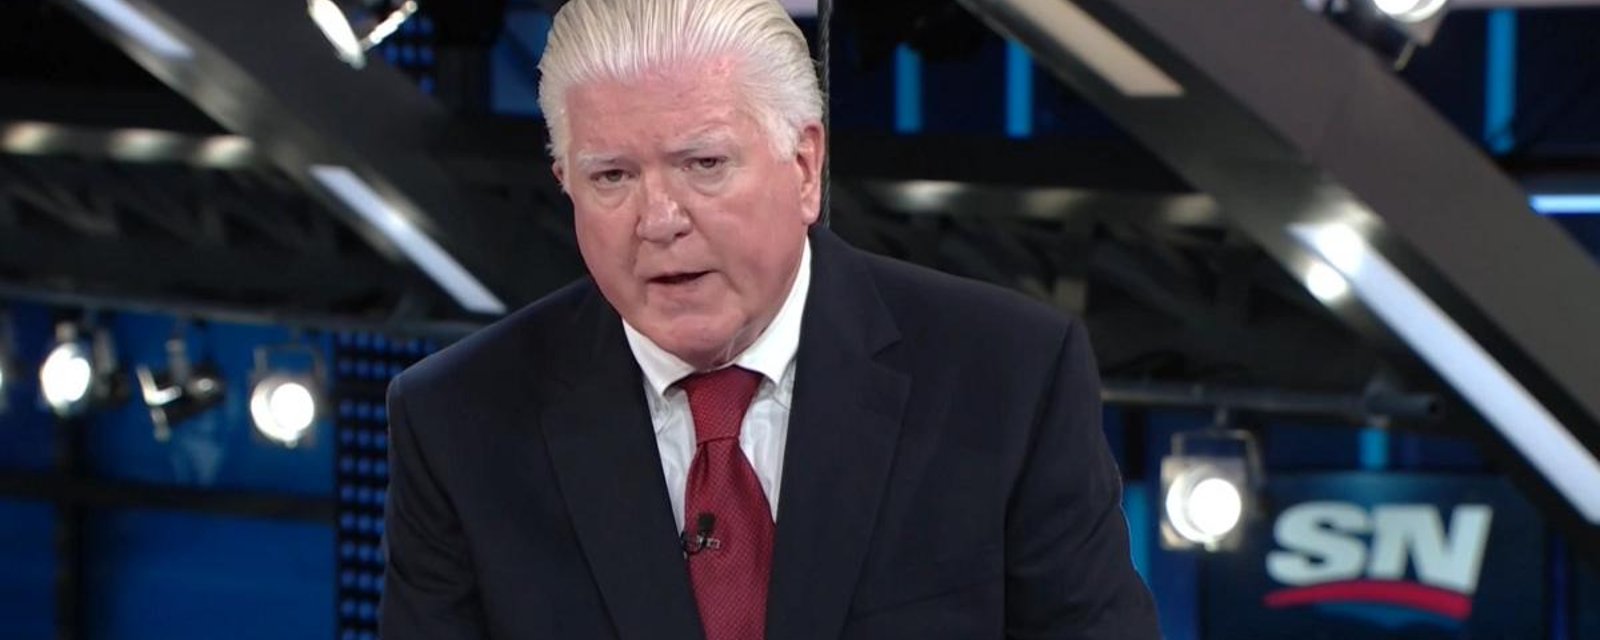 Brian Burke names his pick to take over as head coach of the Washington Capitals.